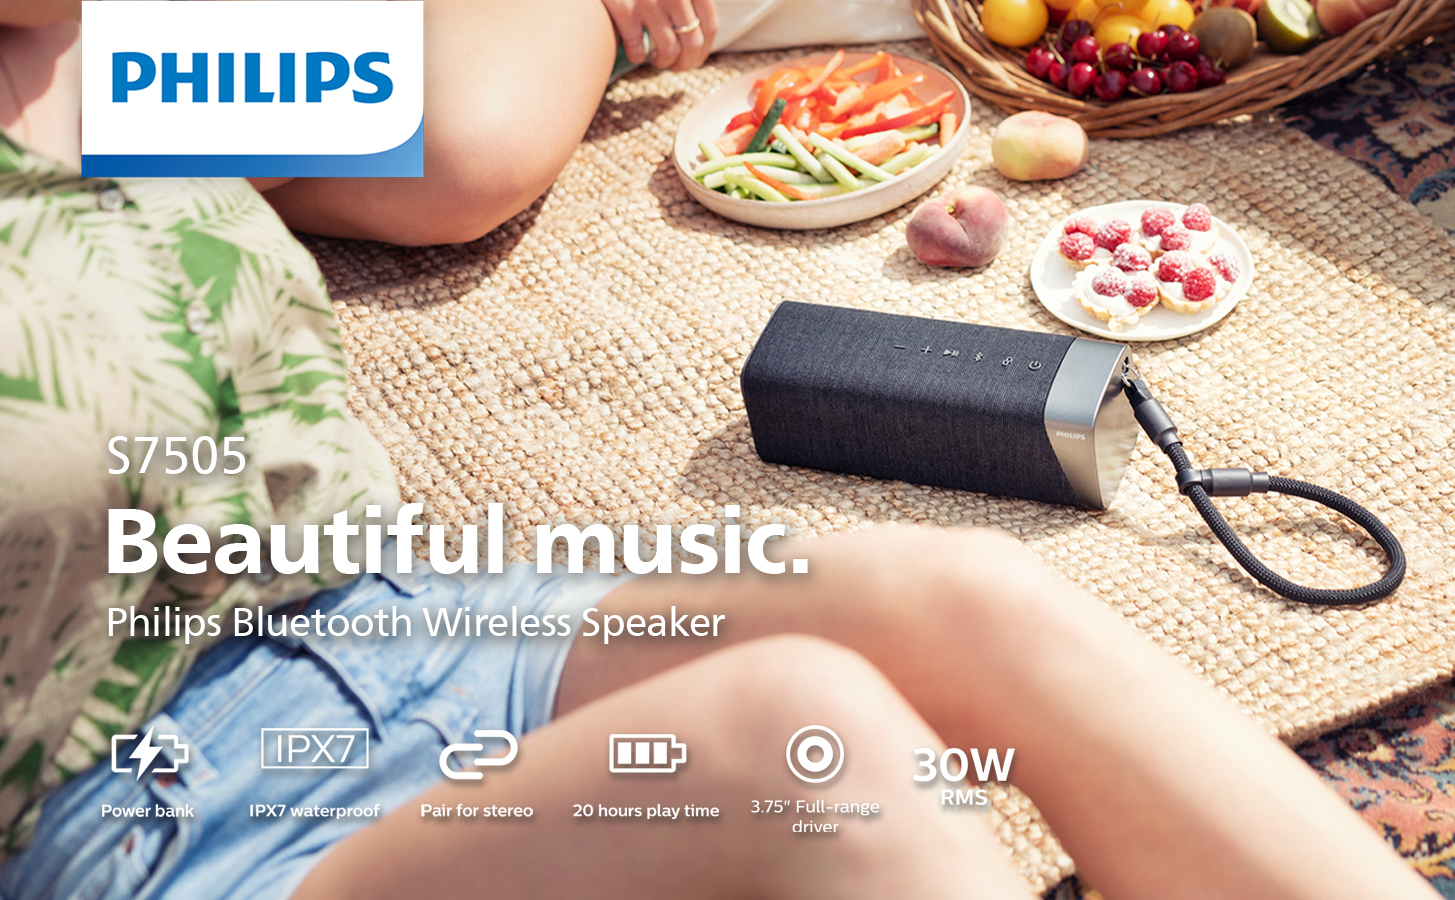 Philips S7505 Wireless Bluetooth Speaker Built-in with Size, Gray, TAS7505 Power-Bank, Large